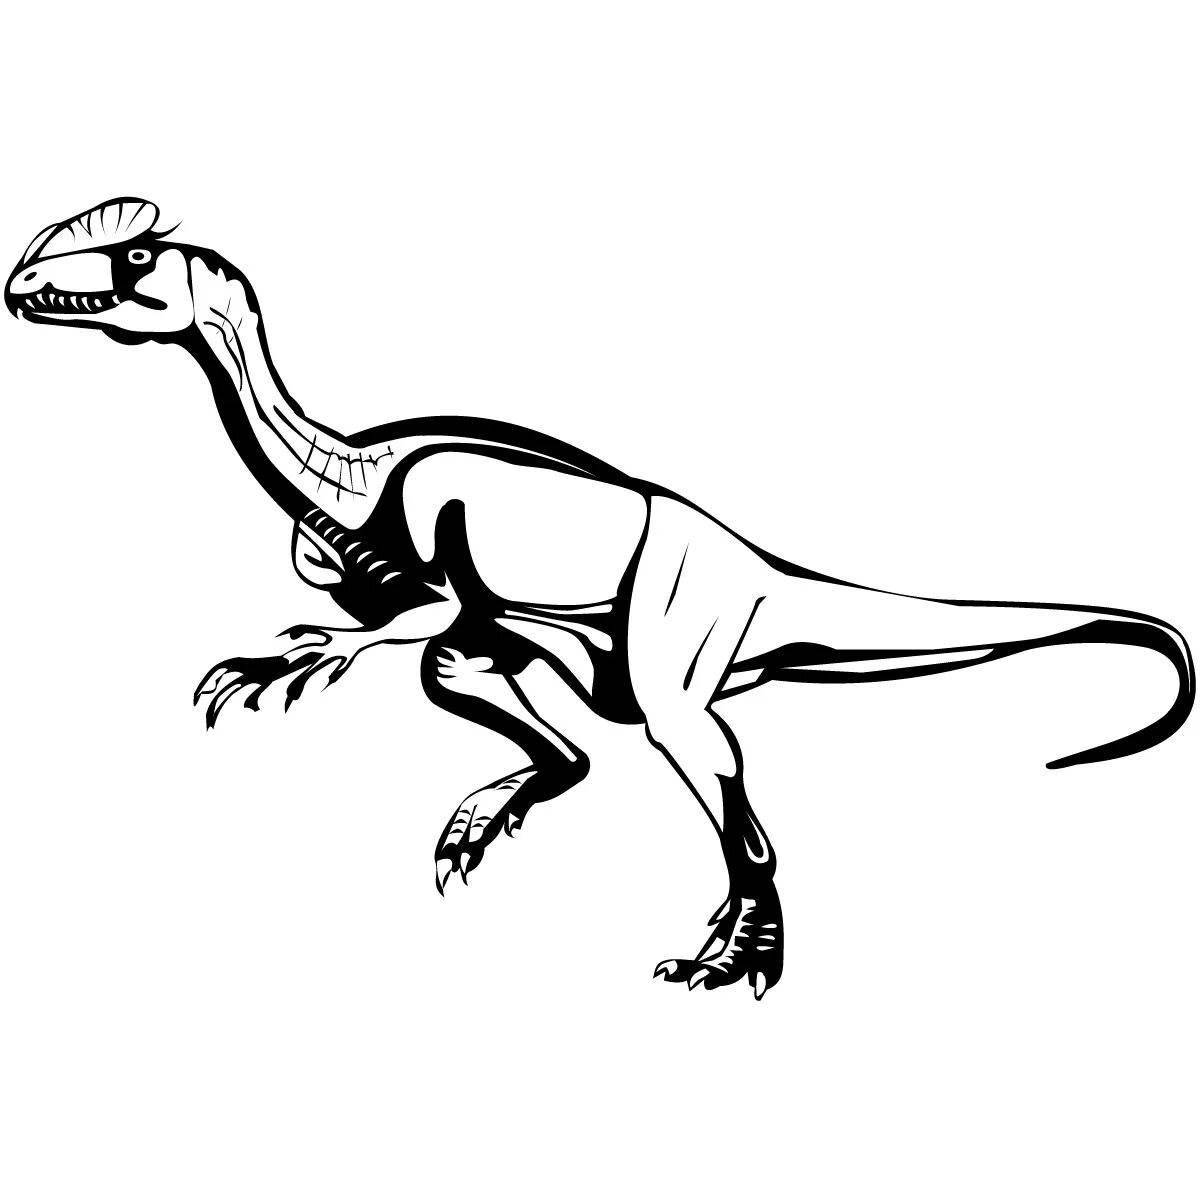 Coloring page glowing velociraptor